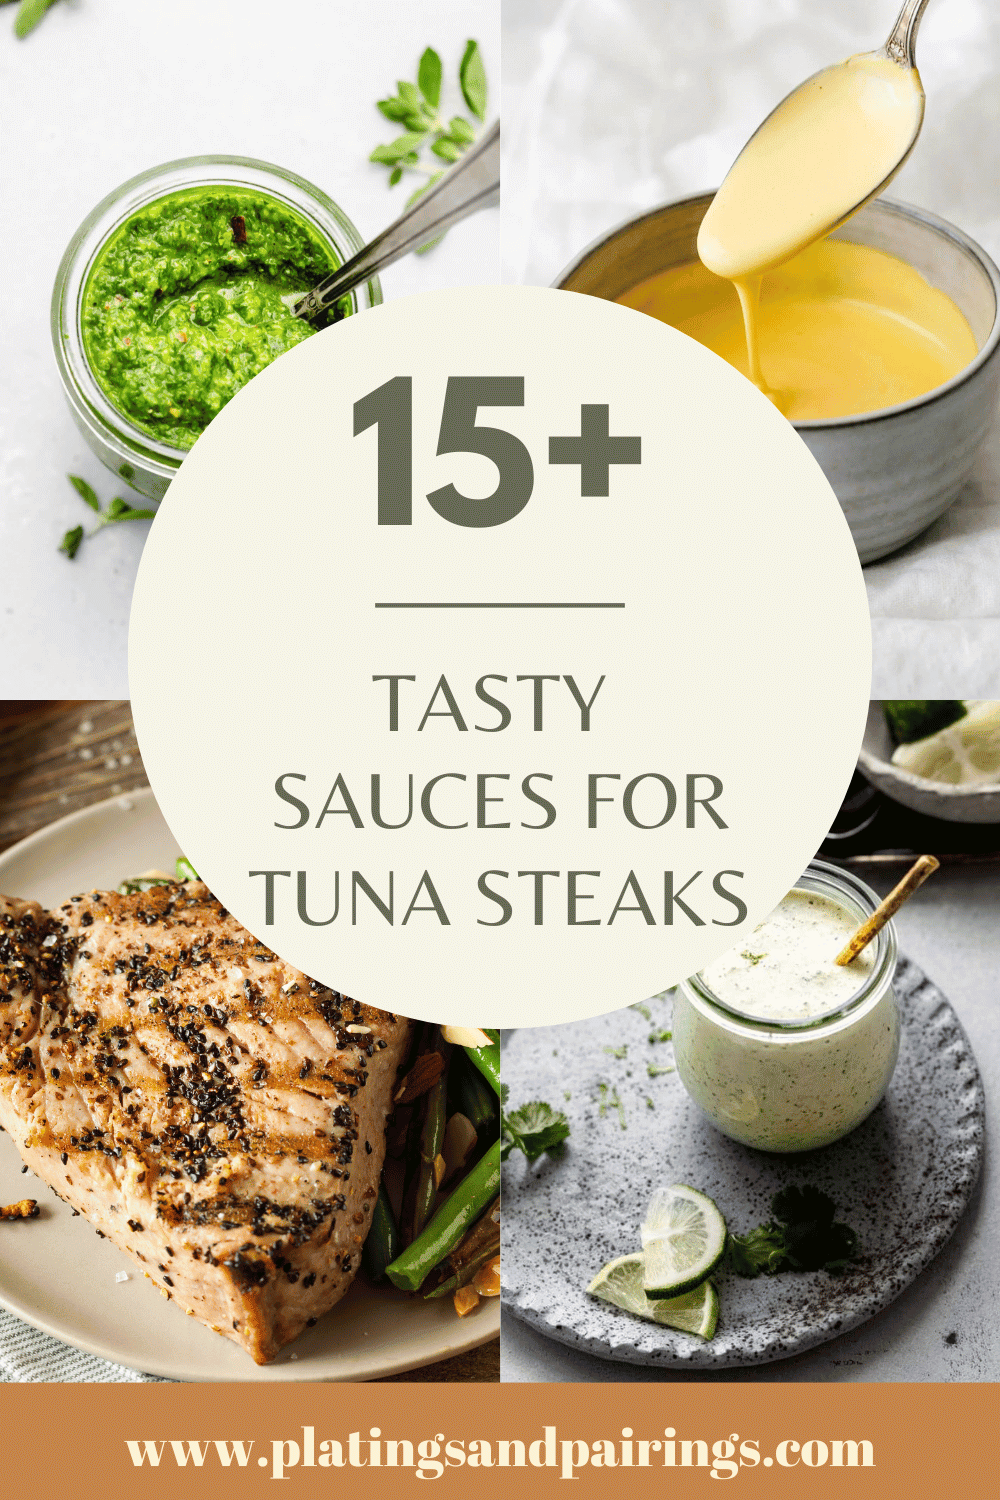 Collage of sauces for tuna steaks with text overlay.